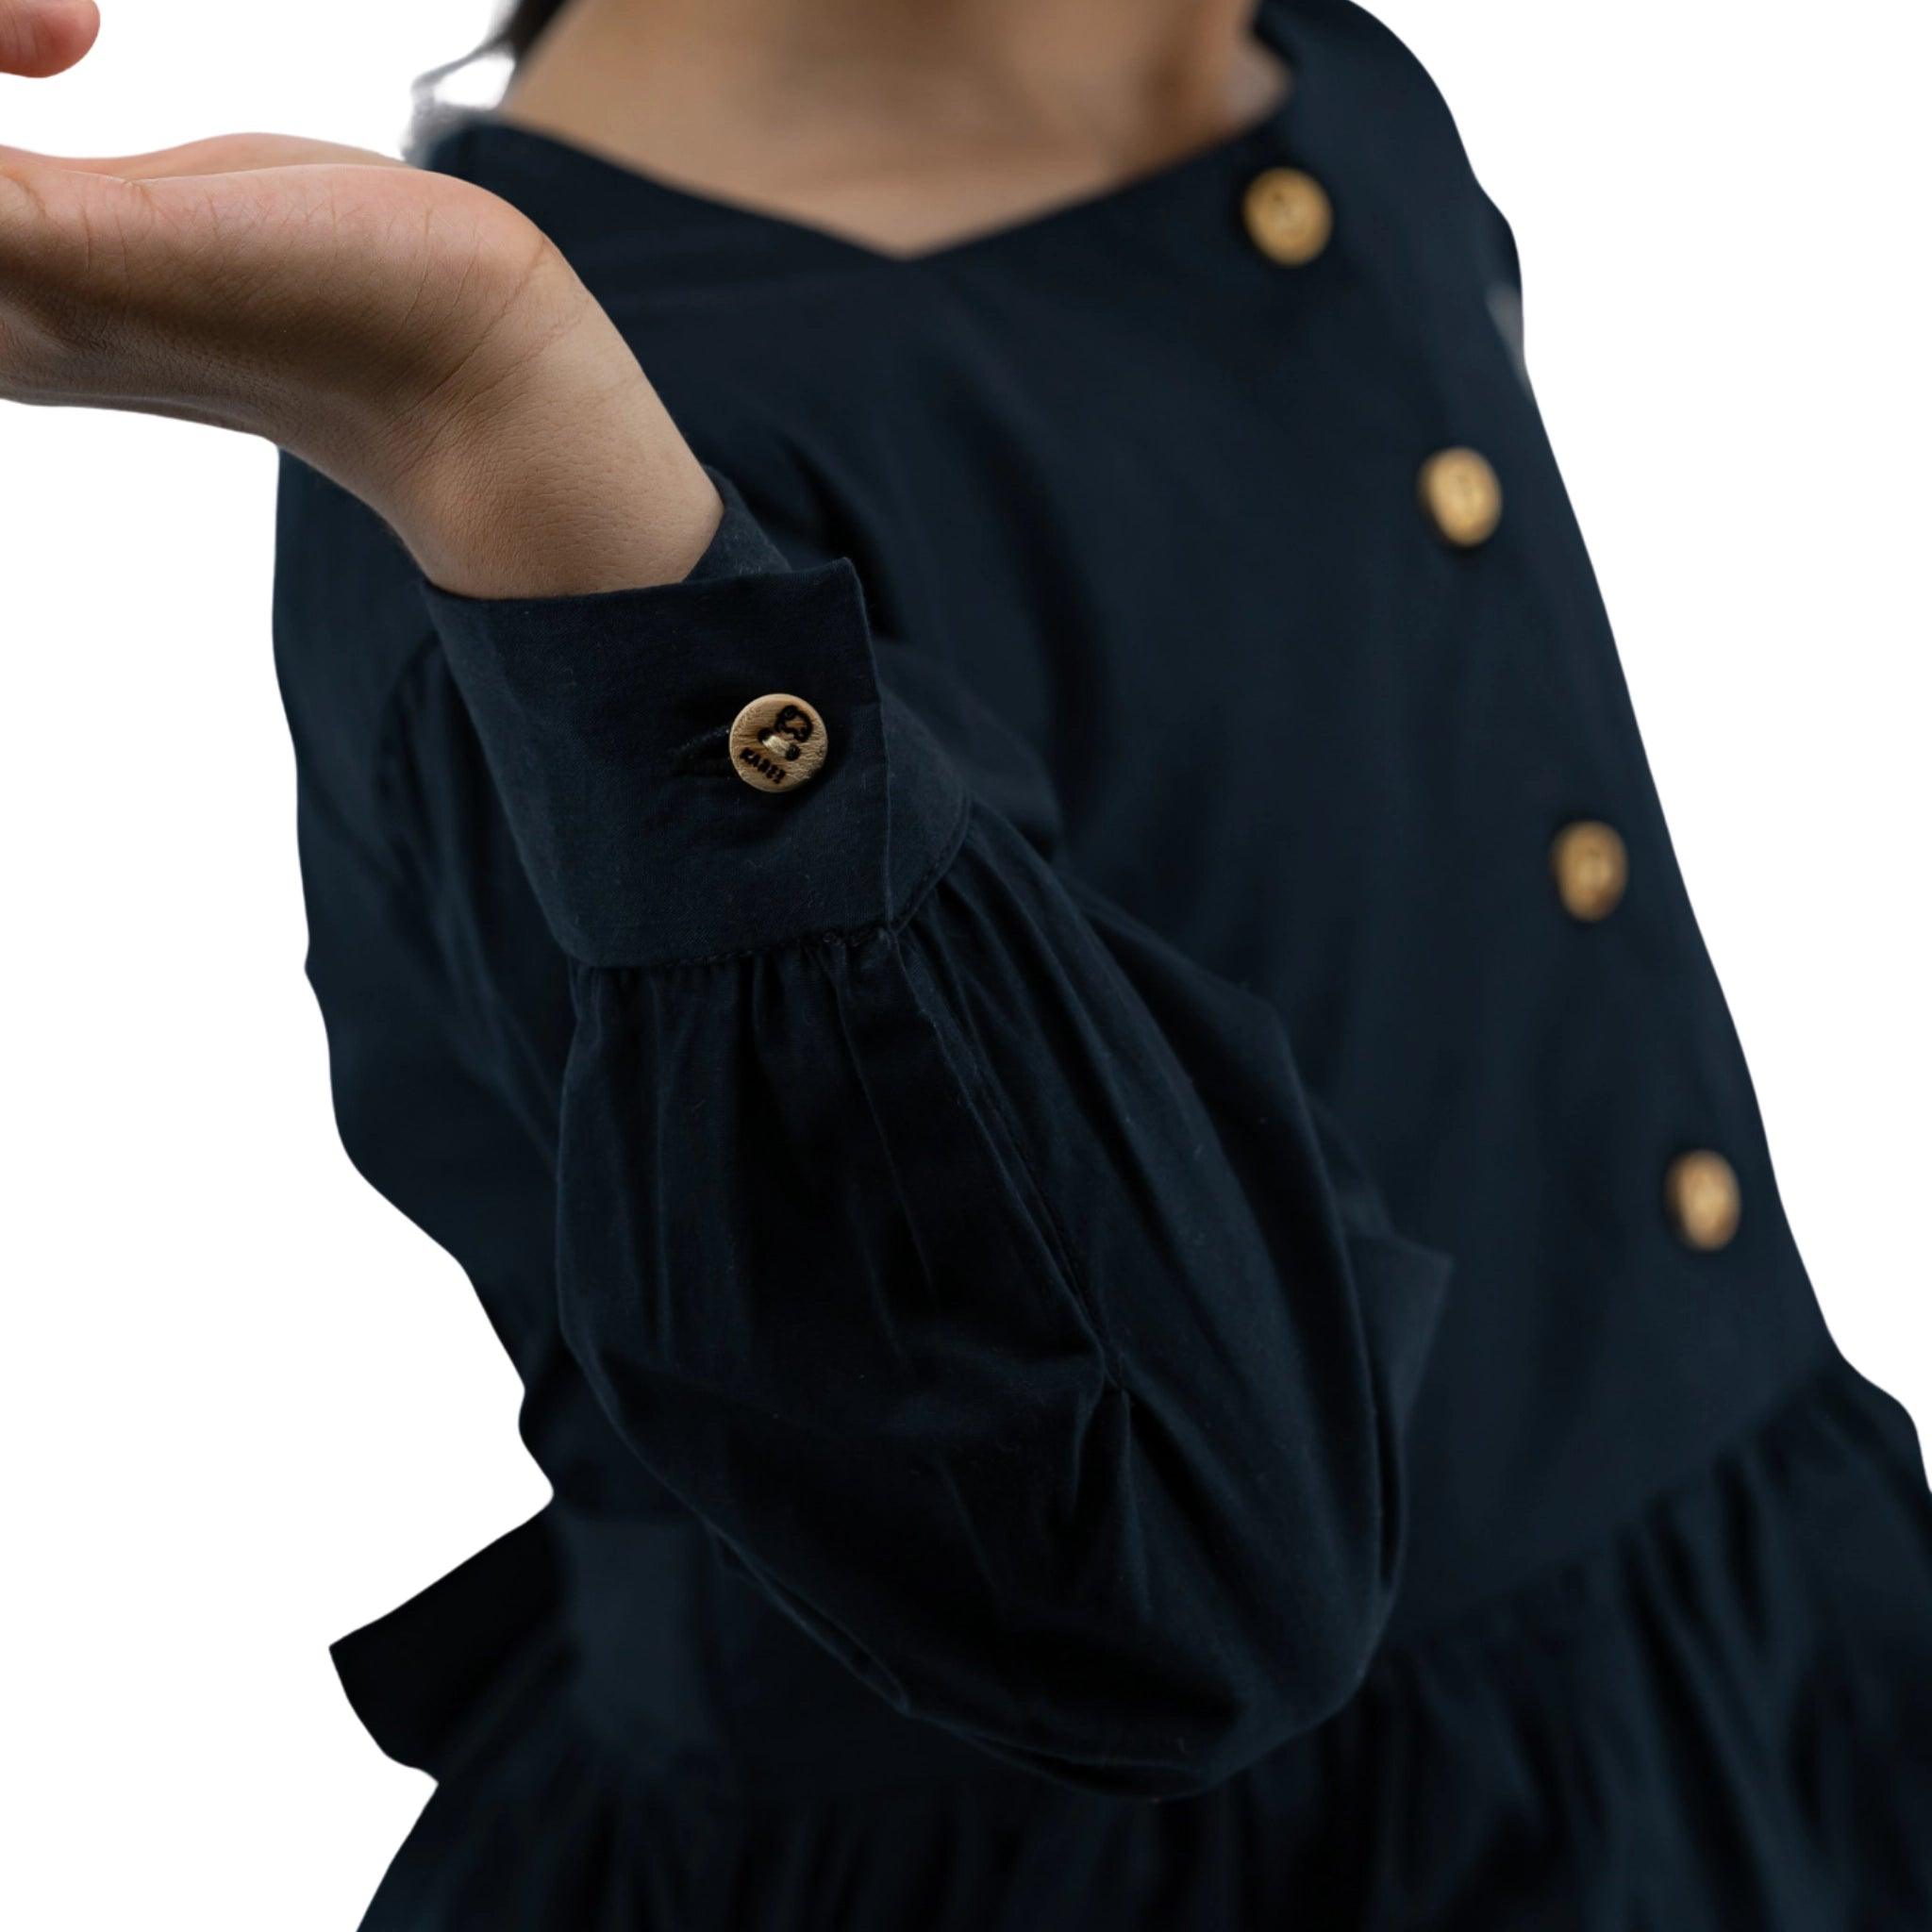 Close-up of a woman dressed in a Karee navy blue dress with long puff sleeves and gold buttons, extending her hand, isolated on a white background.